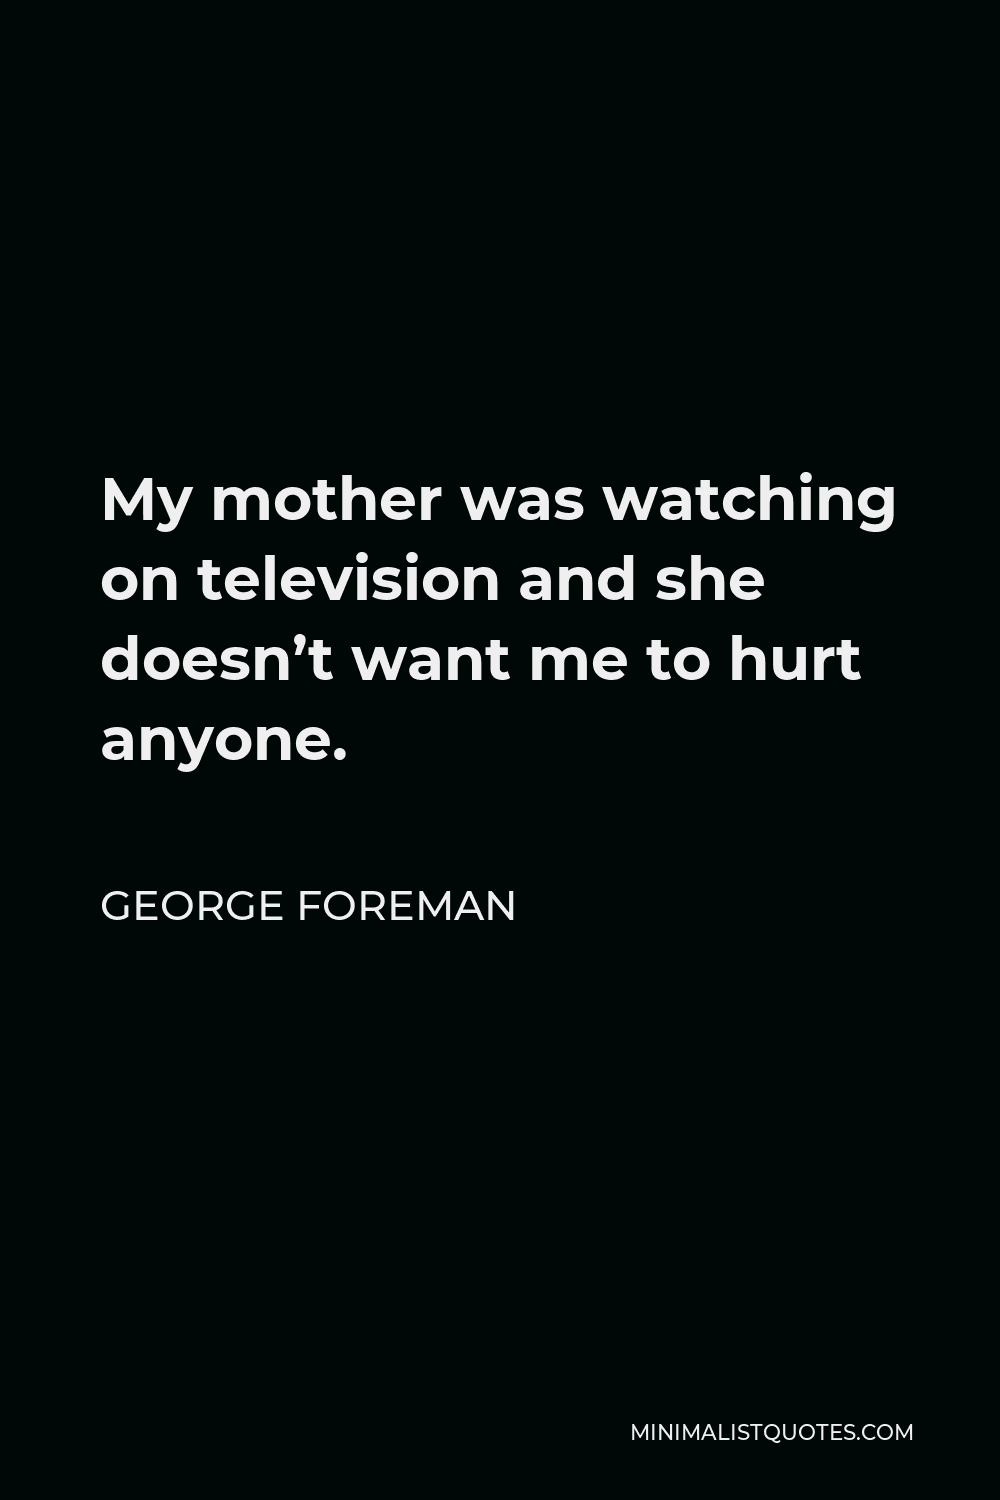 George Foreman Quote - My mother was watching on television and she doesn’t want me to hurt anyone.